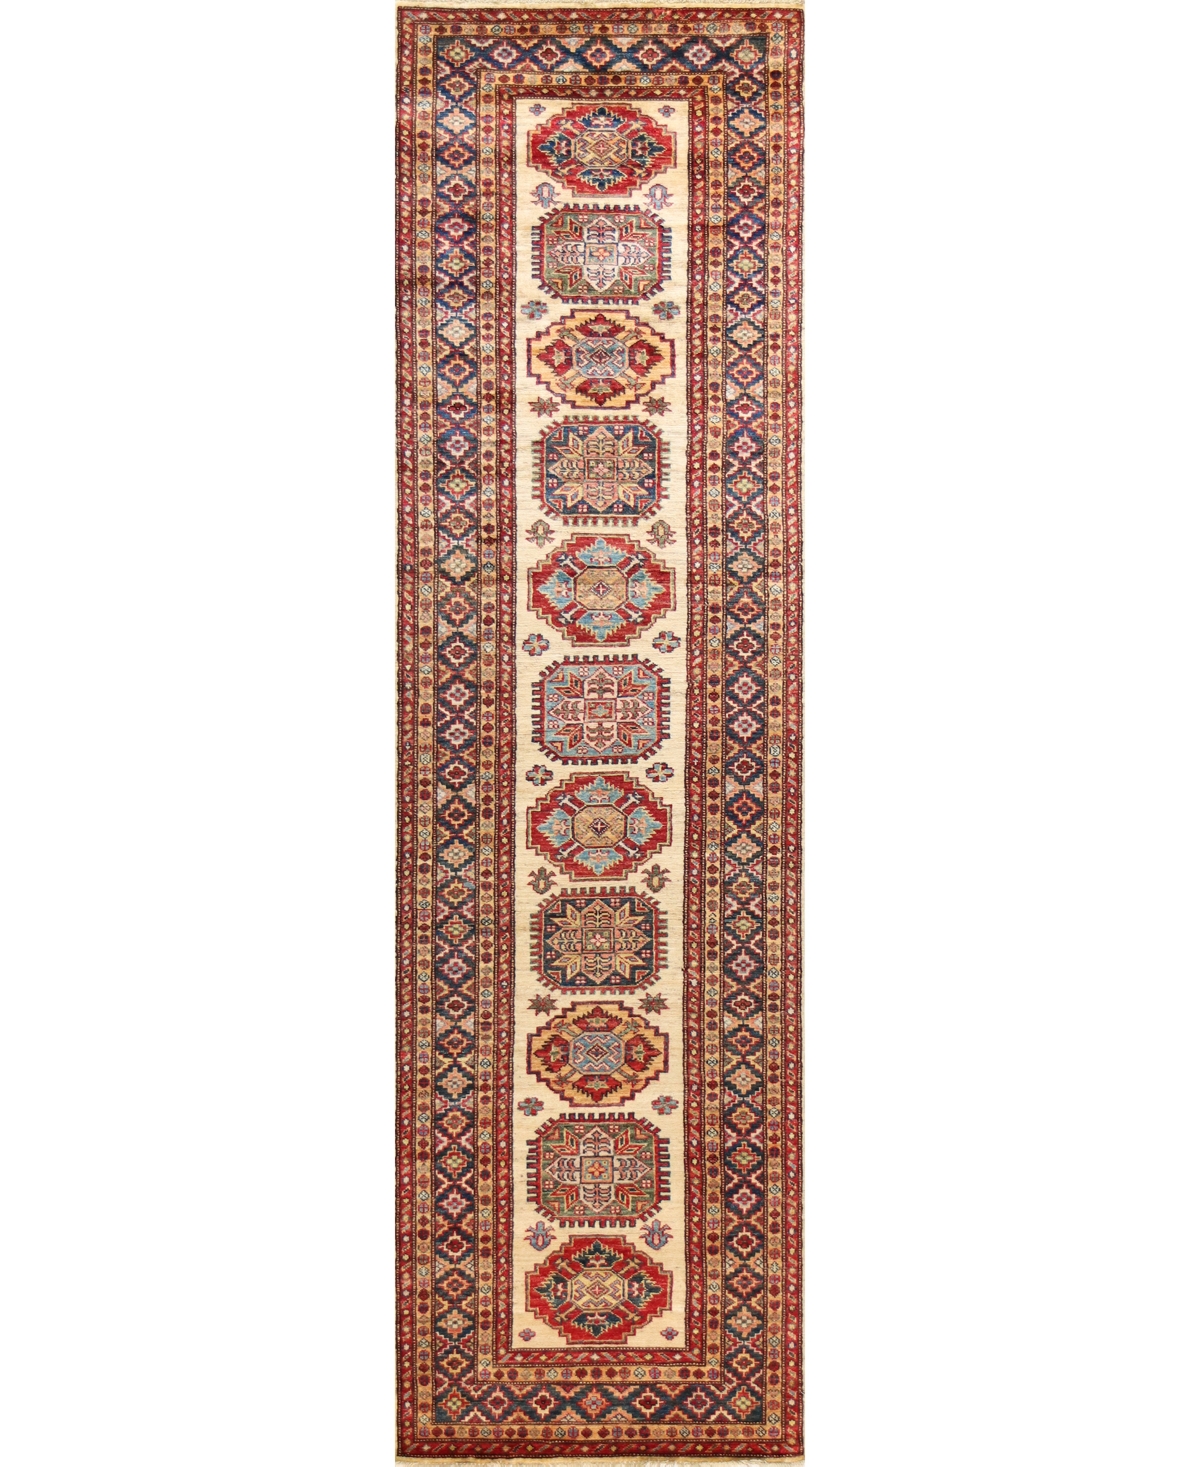 Bb Rugs One Of A Kind Fine Kazak 2'9" X 10'4" Runner Area Rug In Ivory